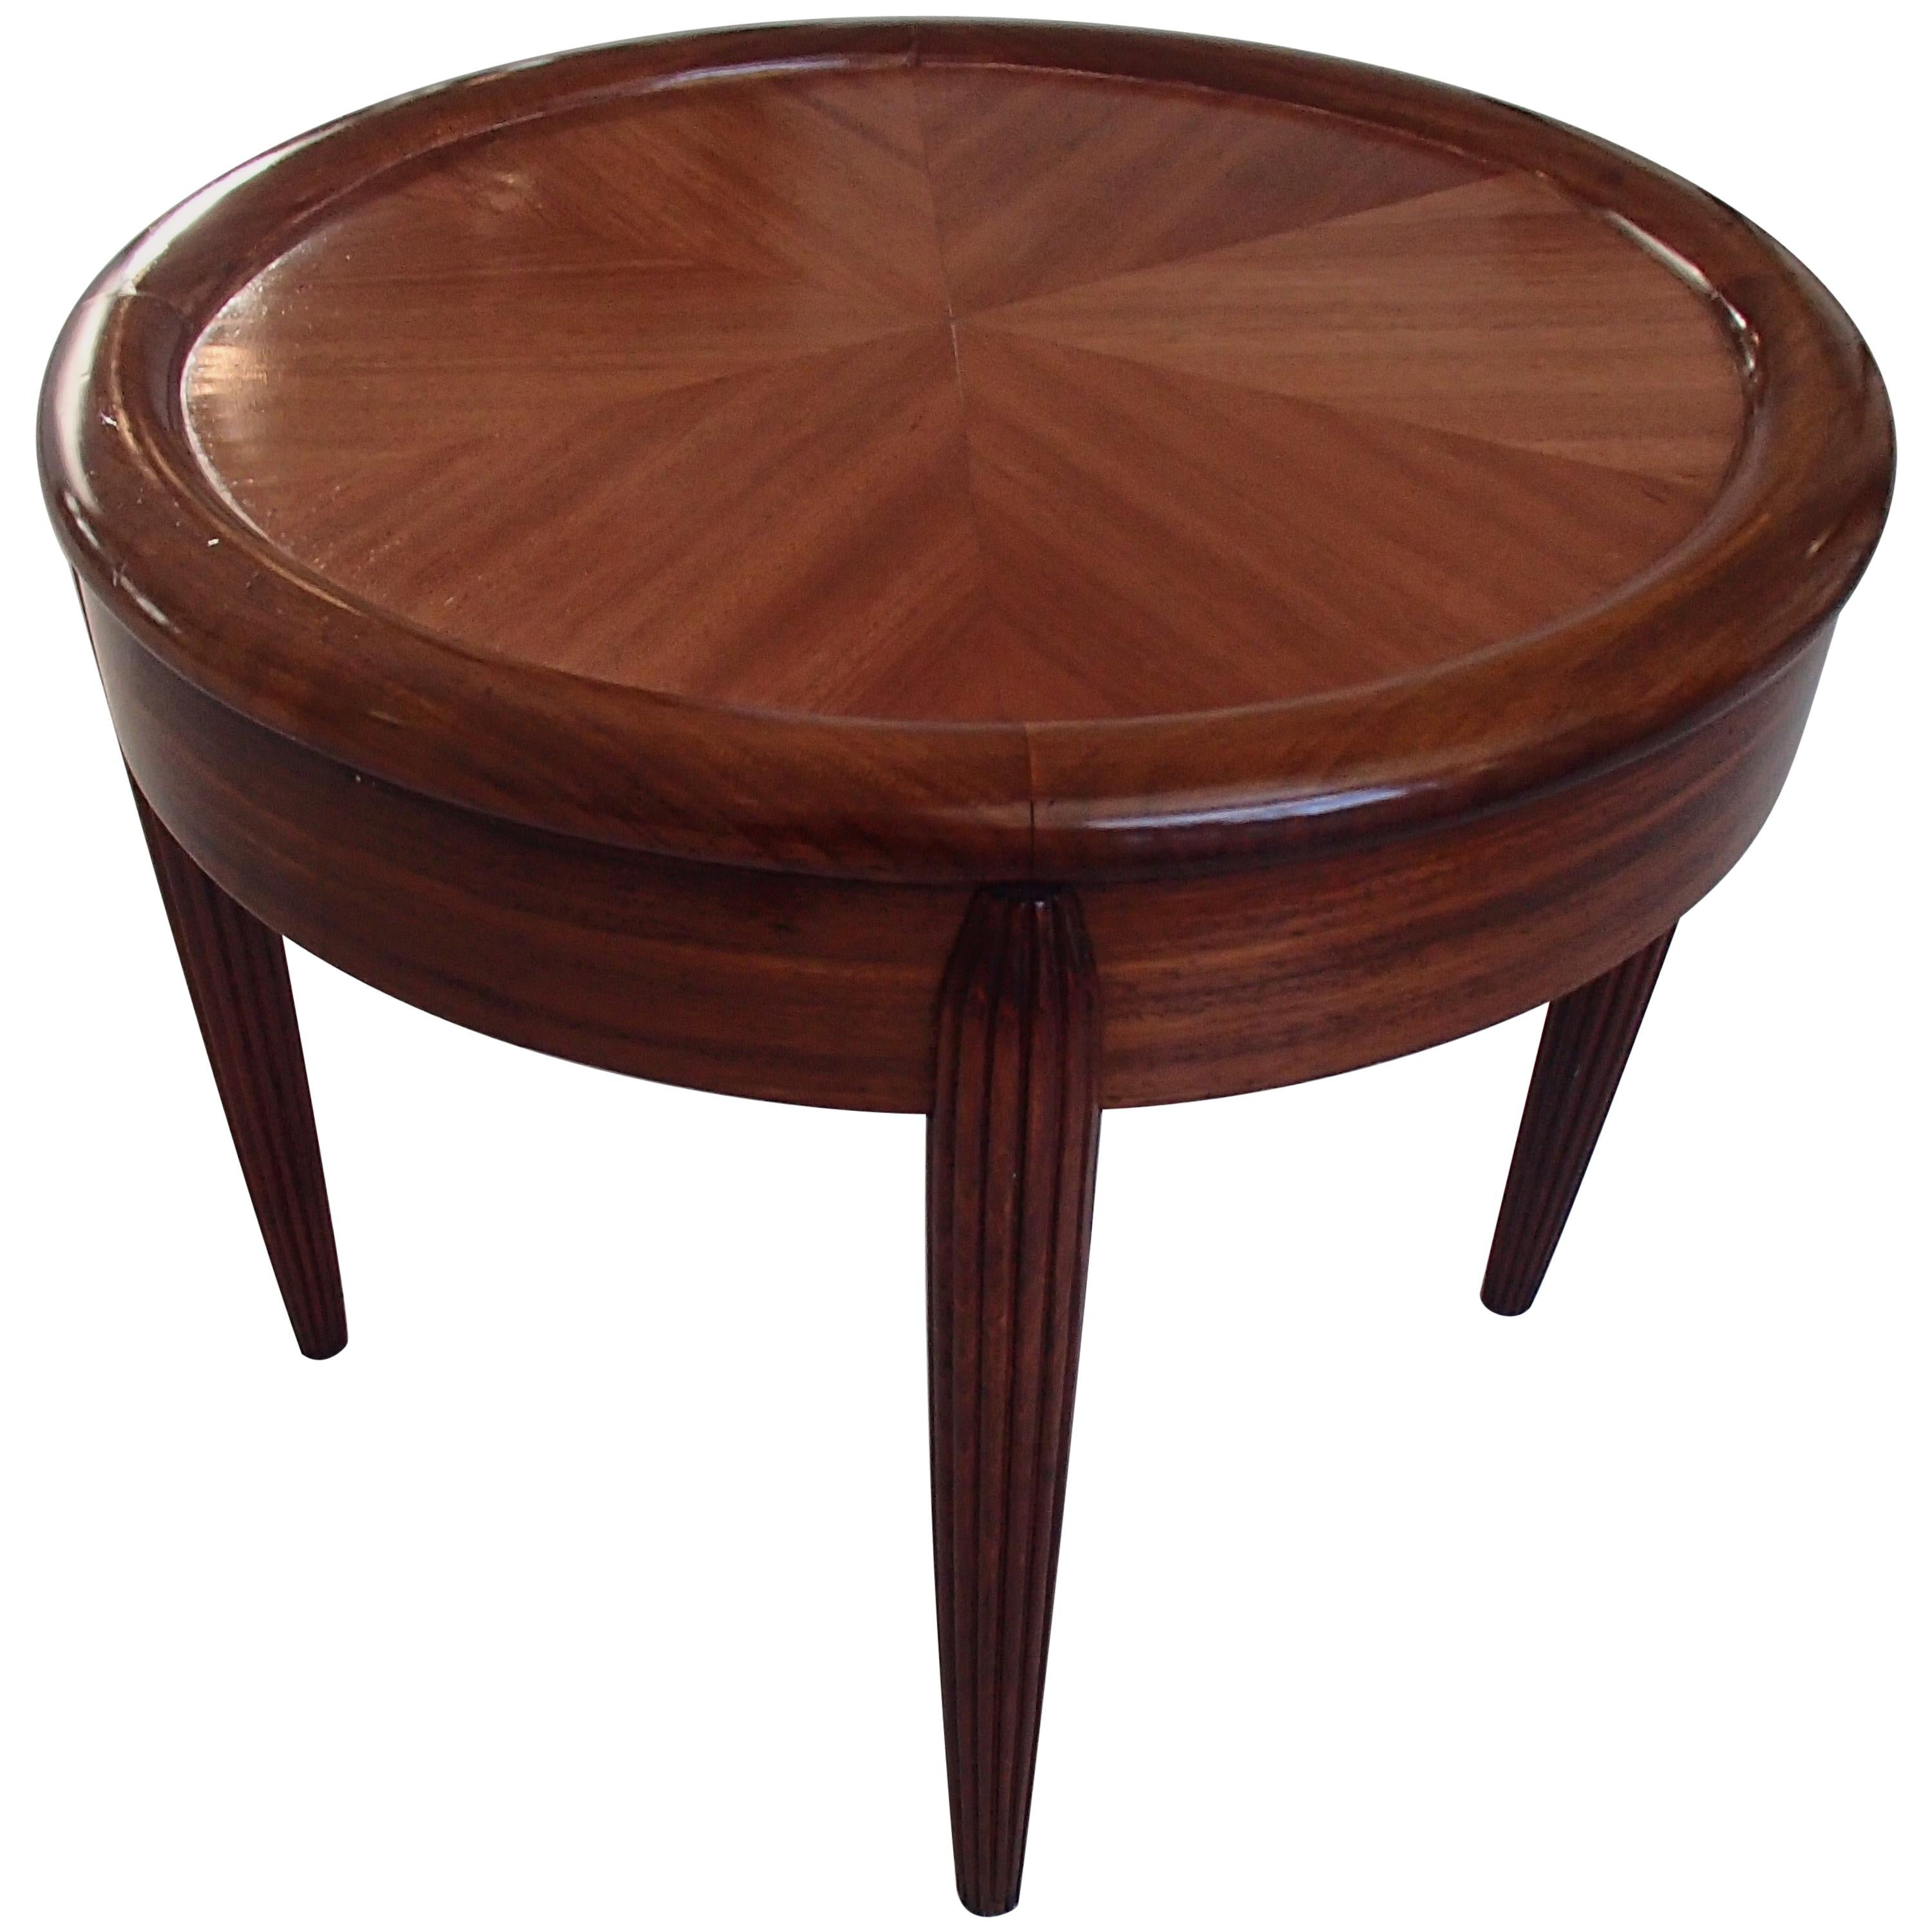 Art Deco Small Round Full Mahogany Table with Carfed Legs